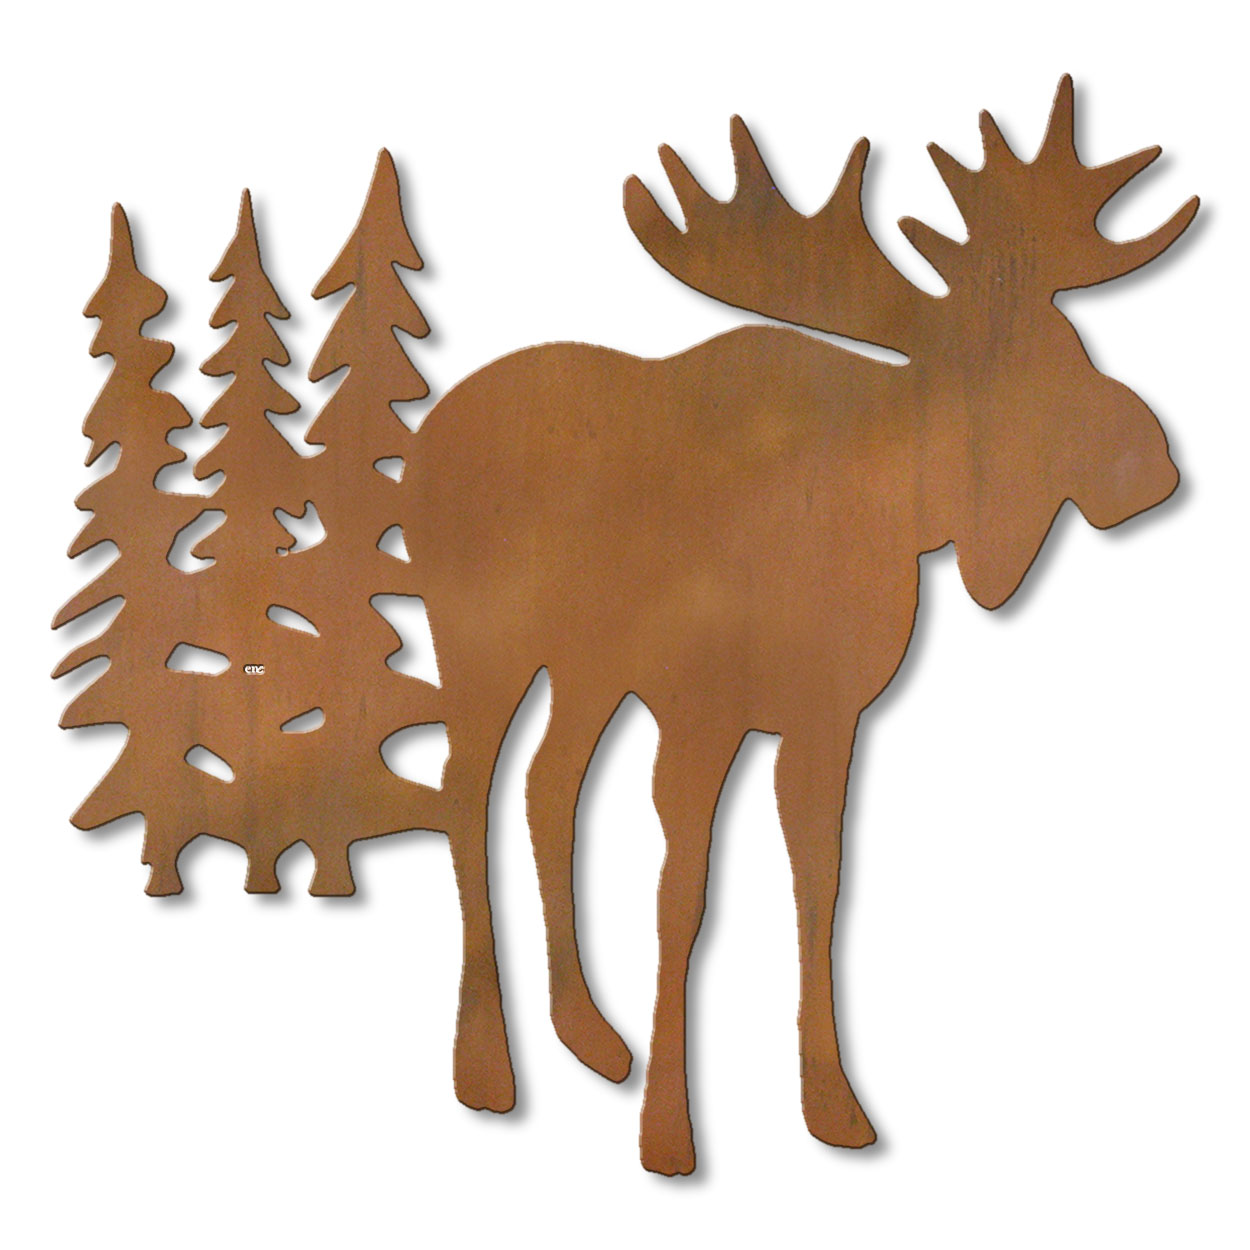 625035r - 18 or 24in Metal Wall Art - Moose And Trees - Rust Patina